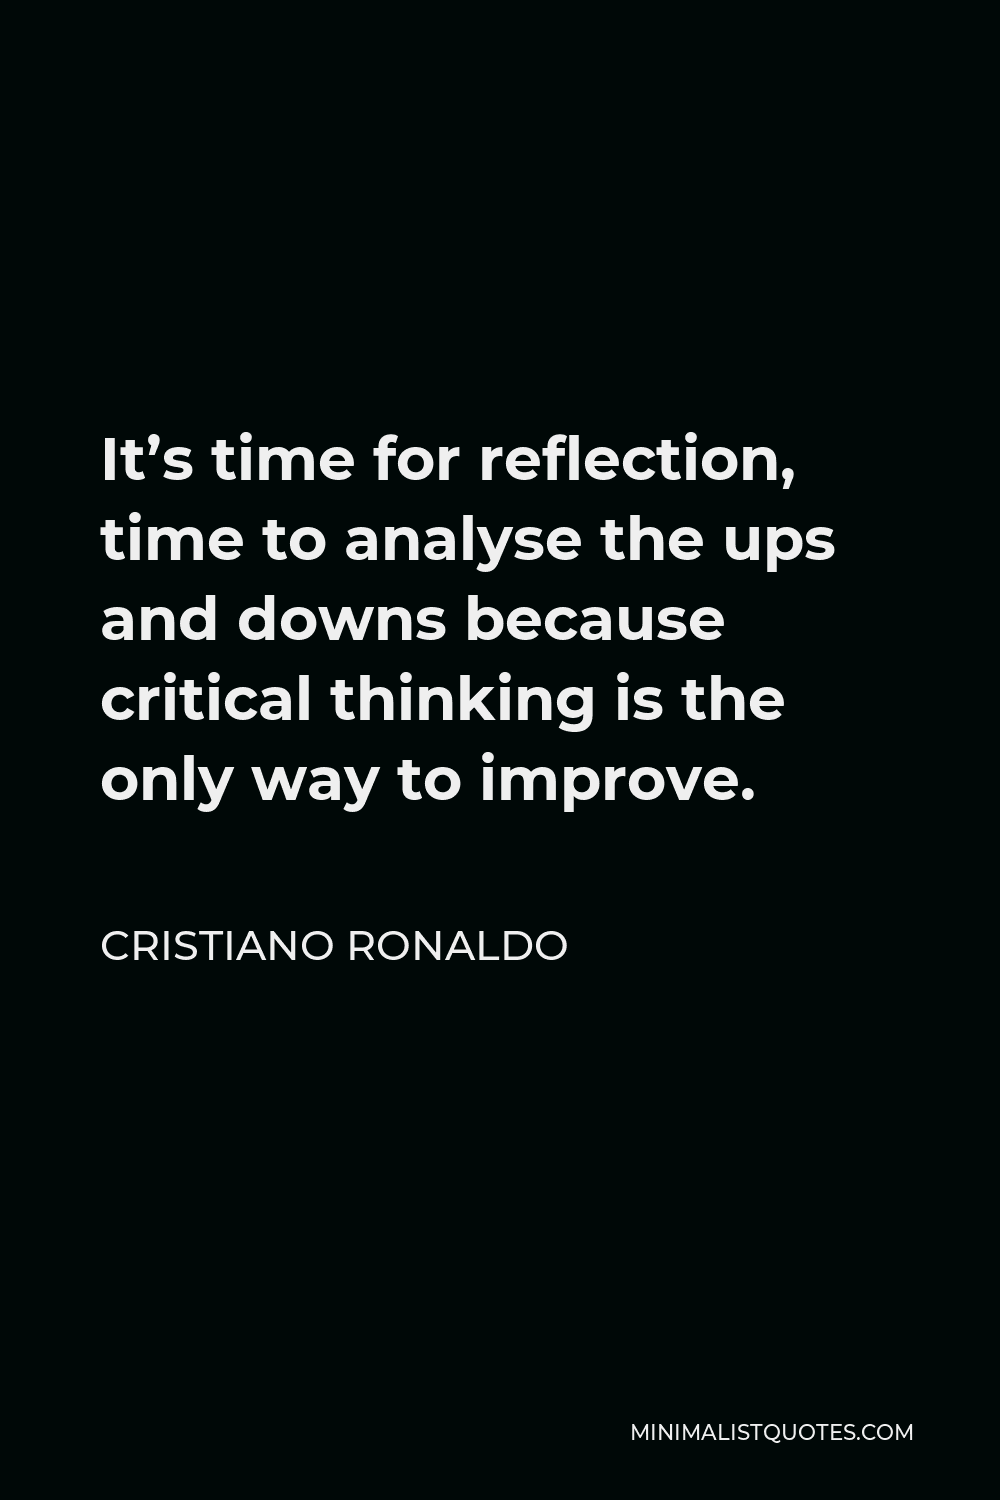 Cristiano Ronaldo Quote - It’s time for reflection, time to analyse the ups and downs because critical thinking is the only way to improve.